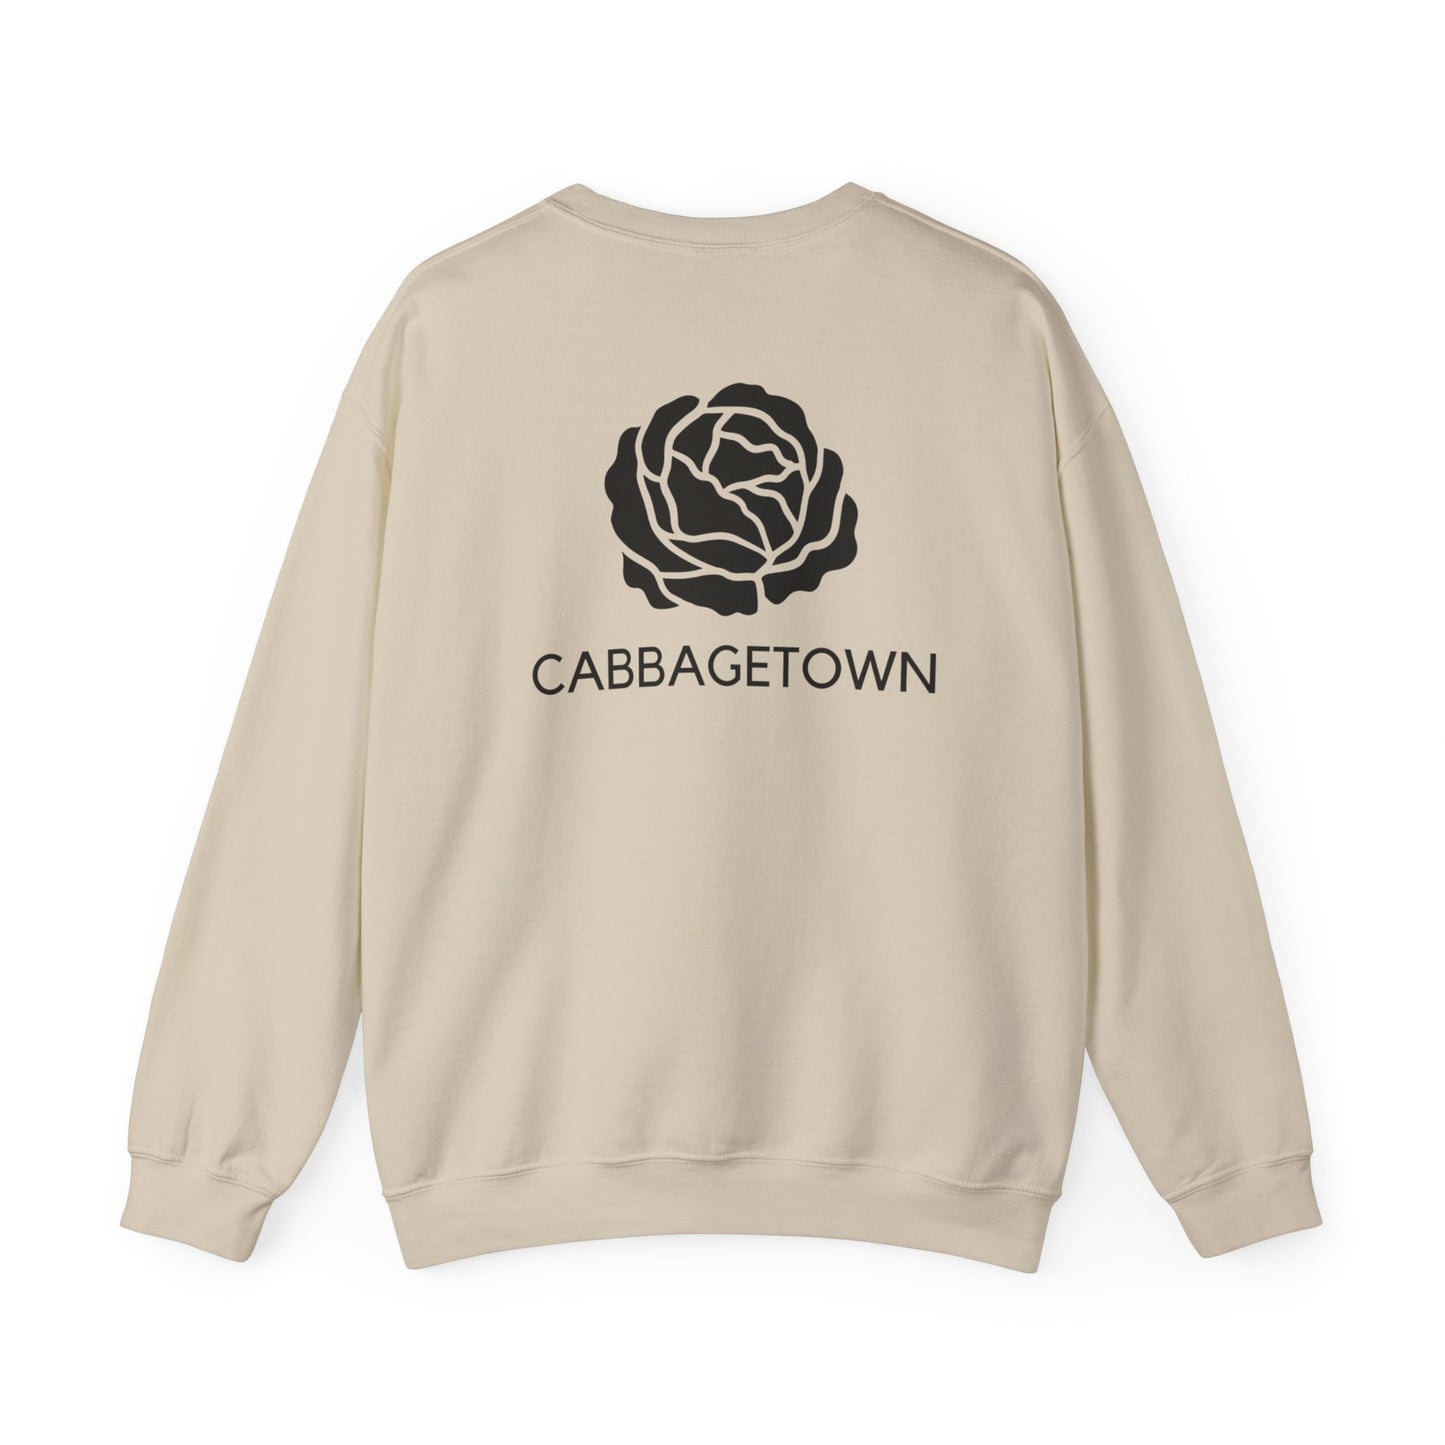 A Unisex Heavy Blend™ Crewneck Monochrome Logo and Cabbagetown Sweatshirt by Printify with a black graphic of a rose and the word "TORONTO" printed below it on the back. The sweatshirt is displayed on a plain white background.